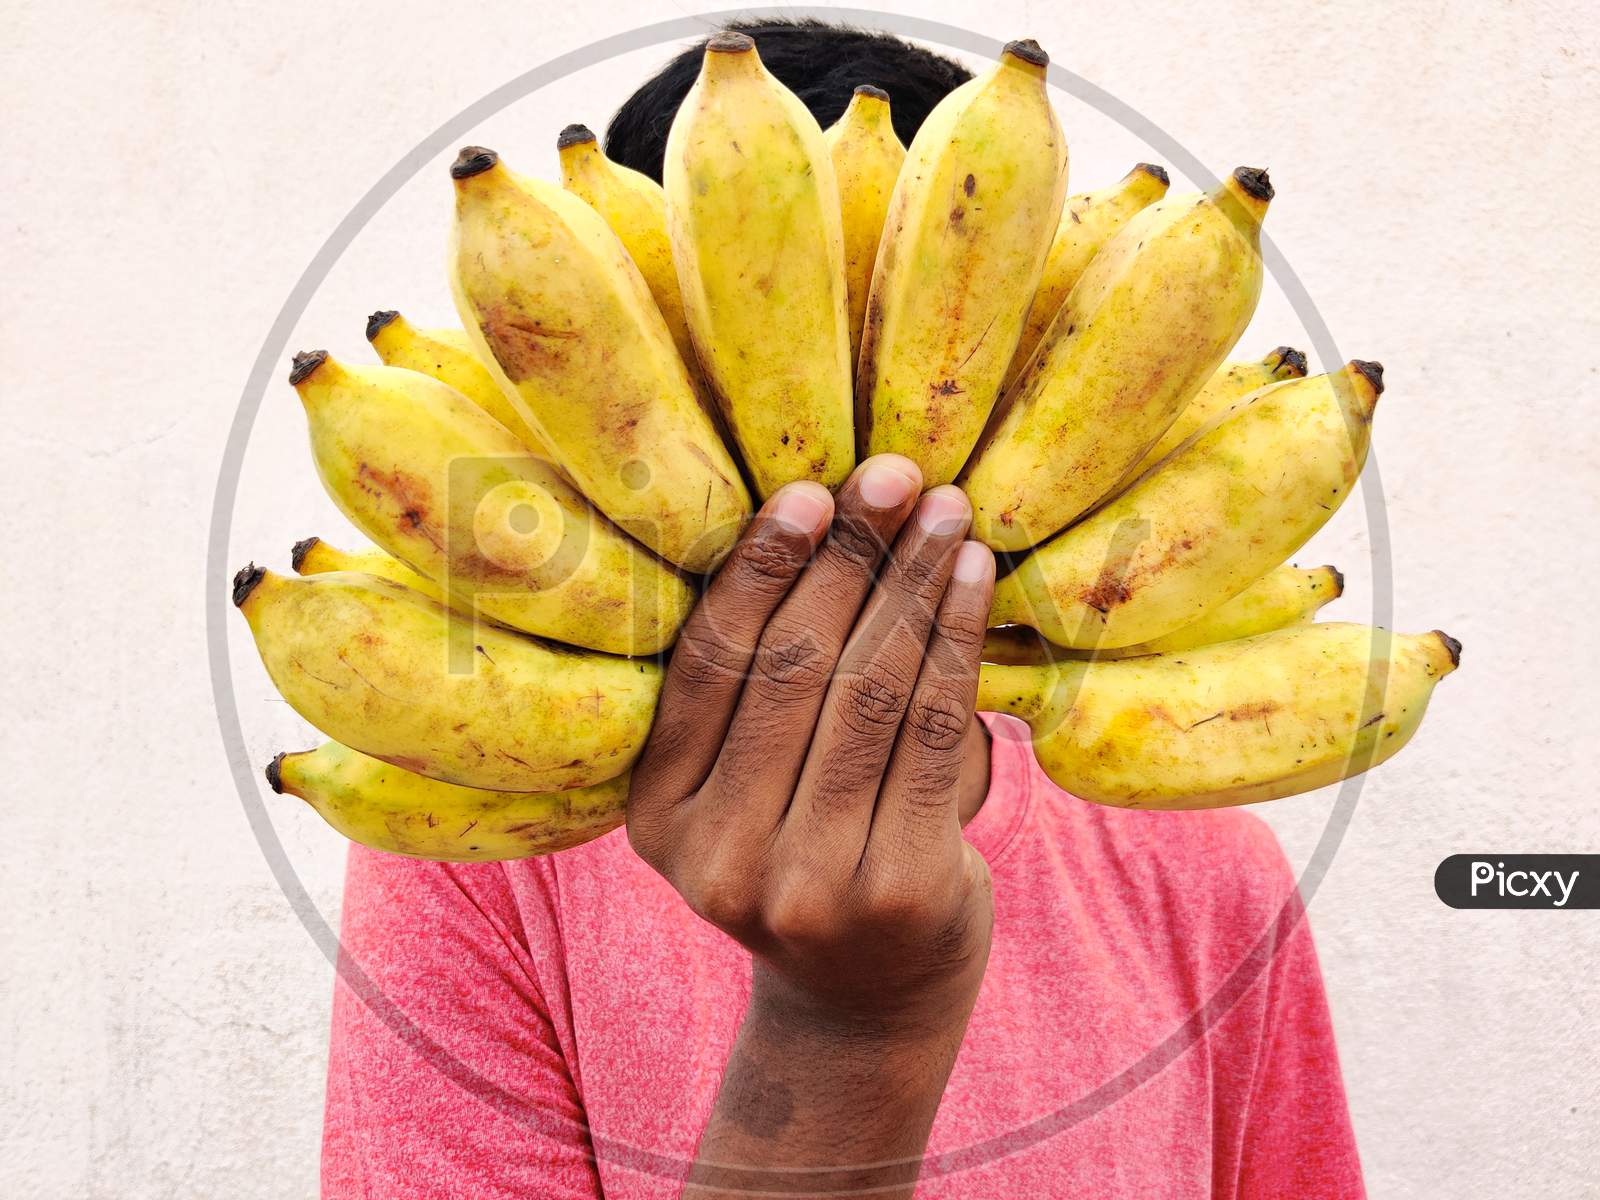 Red Tshirt South Indian Man Covering His Face With A Cluster Of Bananas. Isolated On White Background. Festival Concept